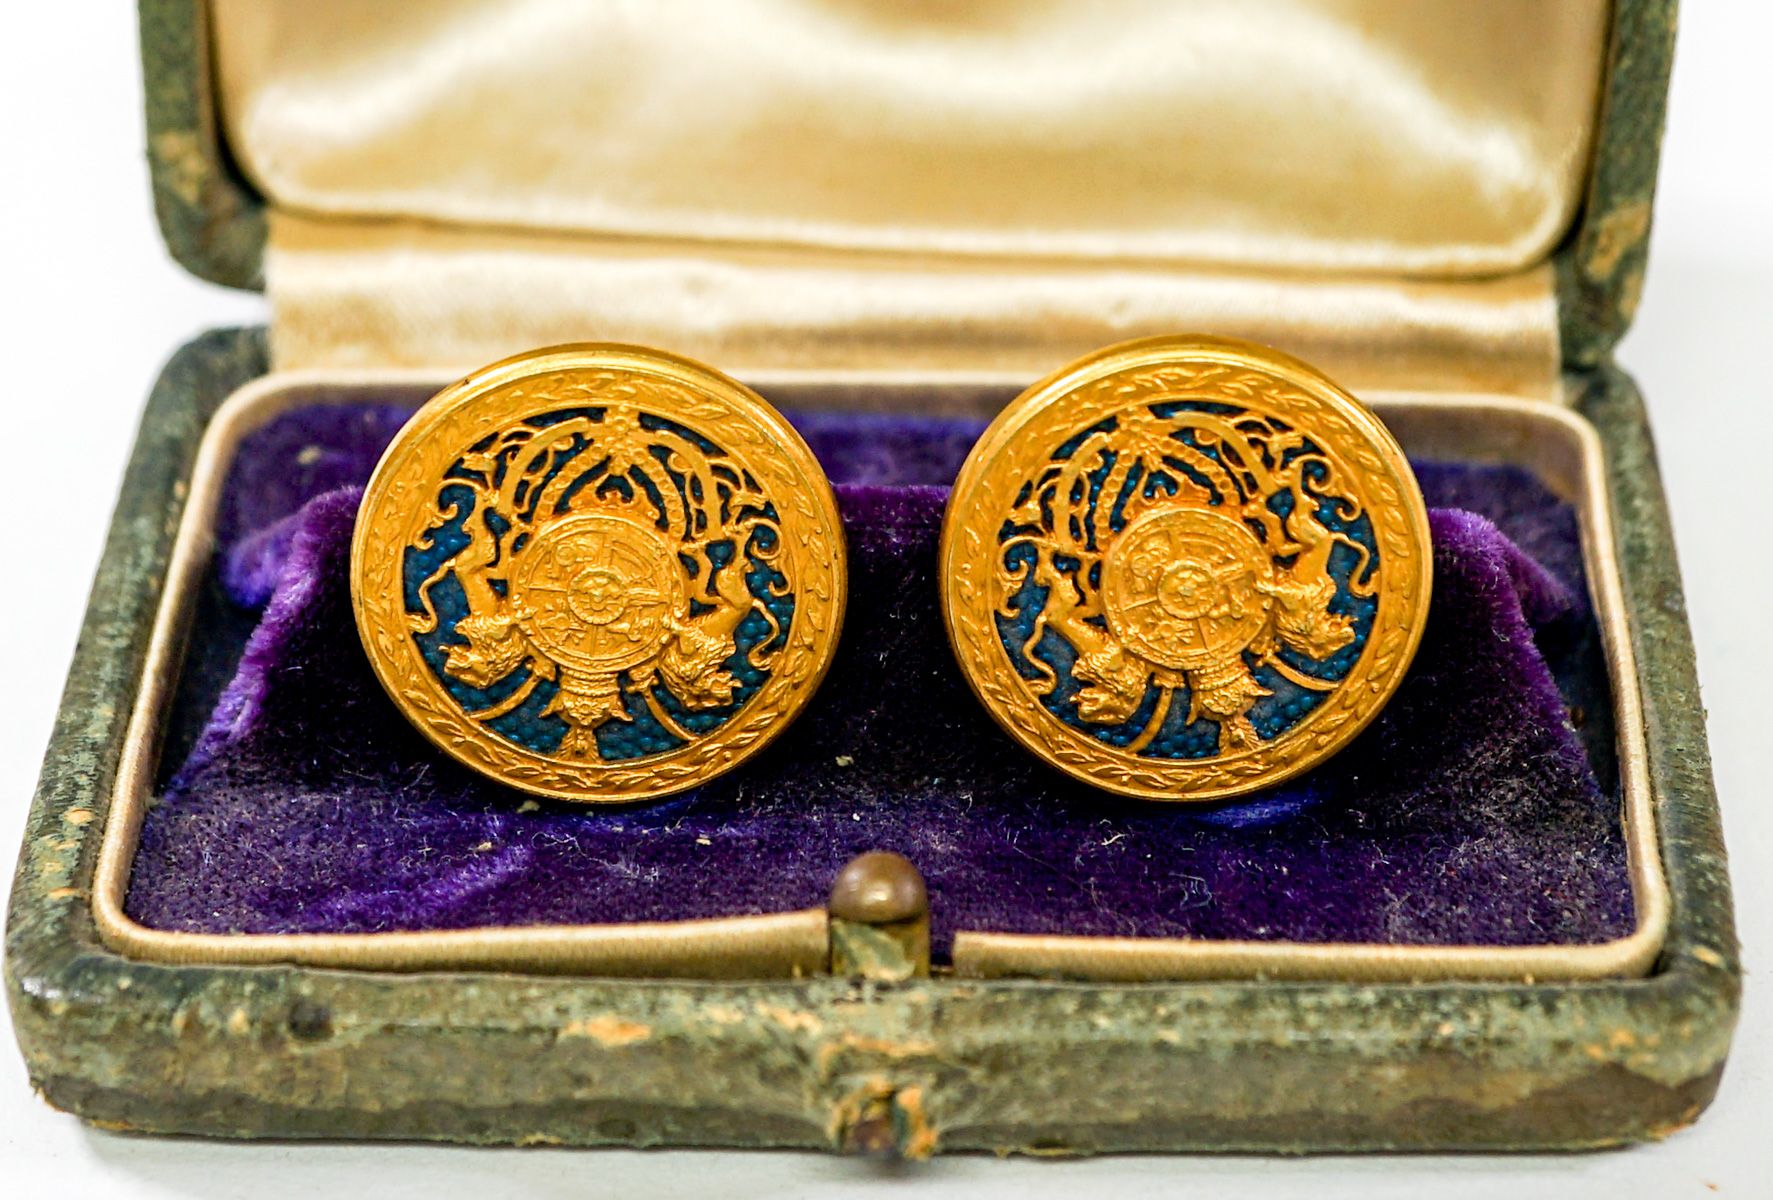 Imperial Coat of Arms of Iran 18k Gold Cufflinks